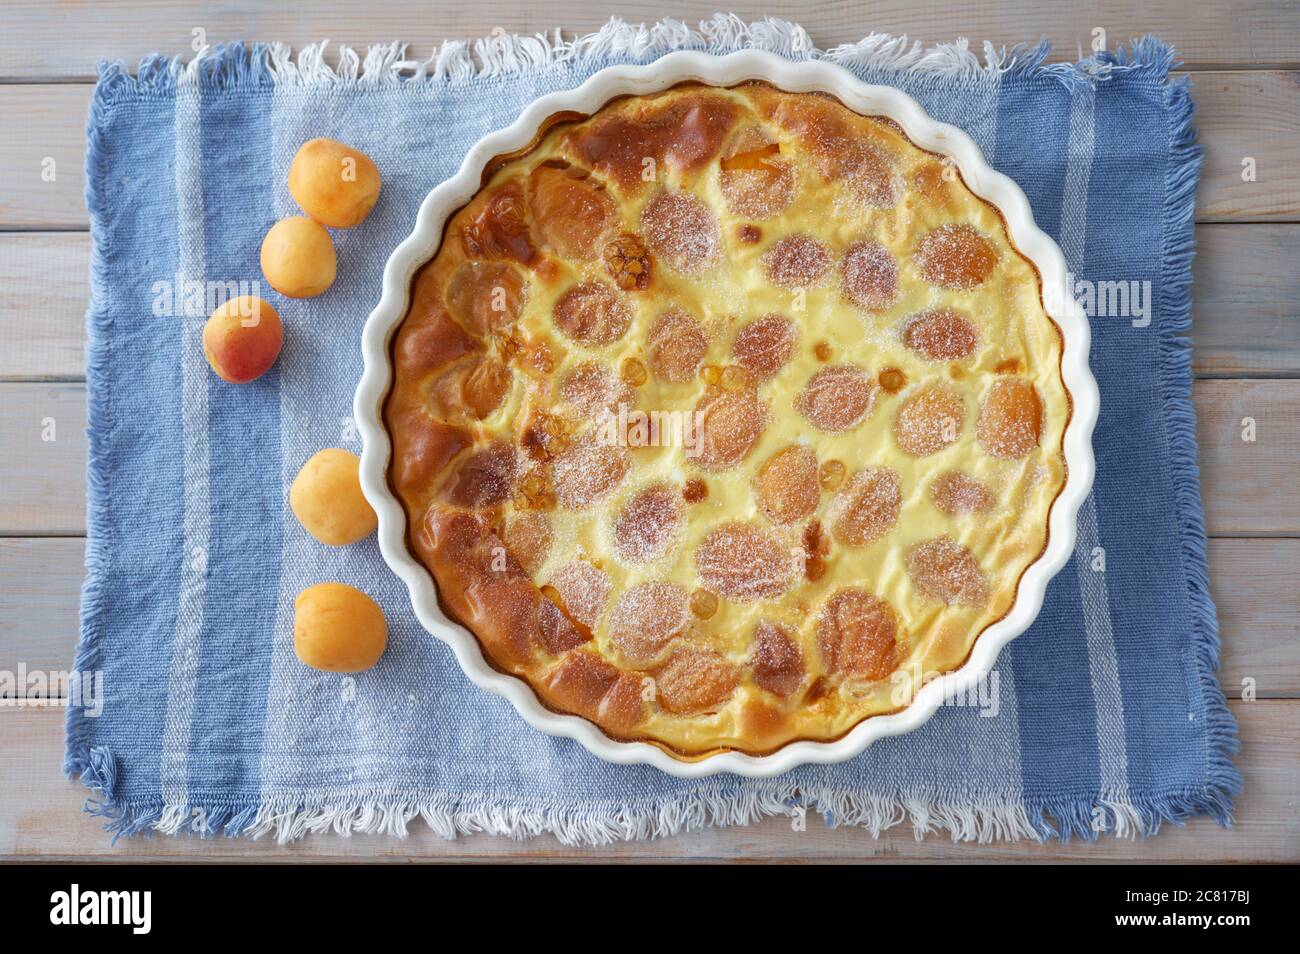 Just baked apricot clafoutis, the traditional French dessert, in a baking dish Stock Photo